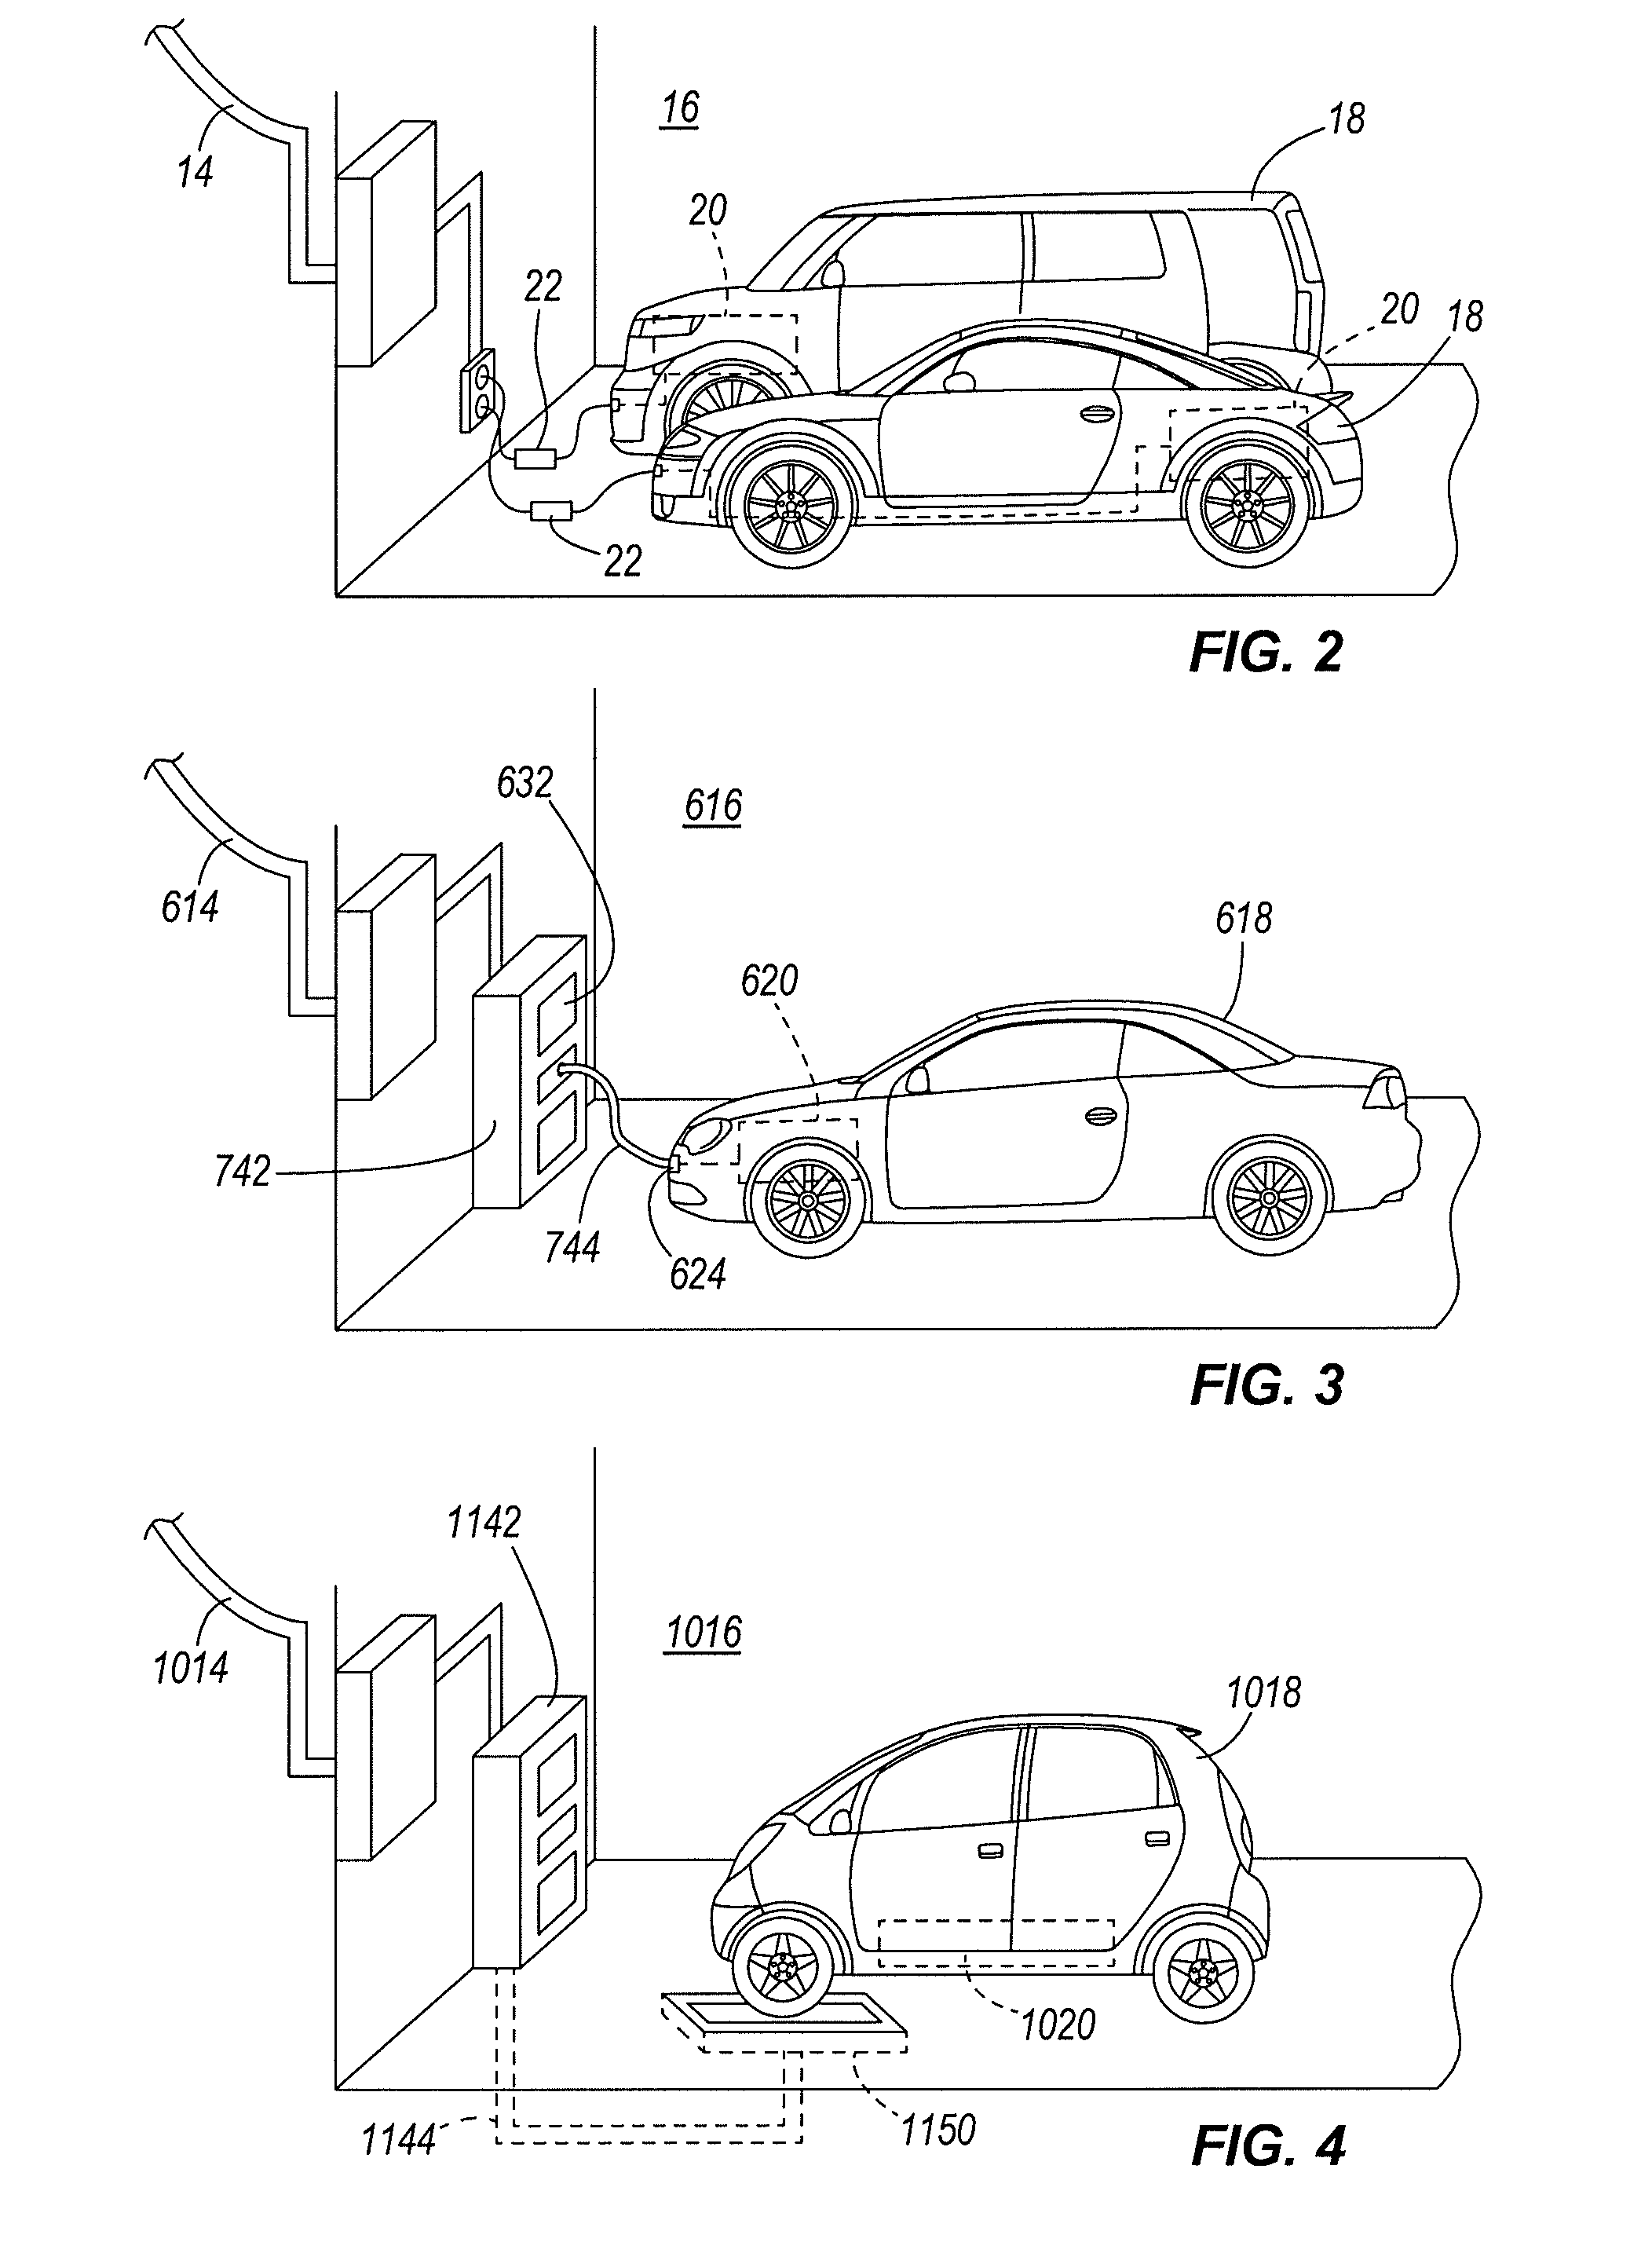 Vehicular batery charger, charging system, and method